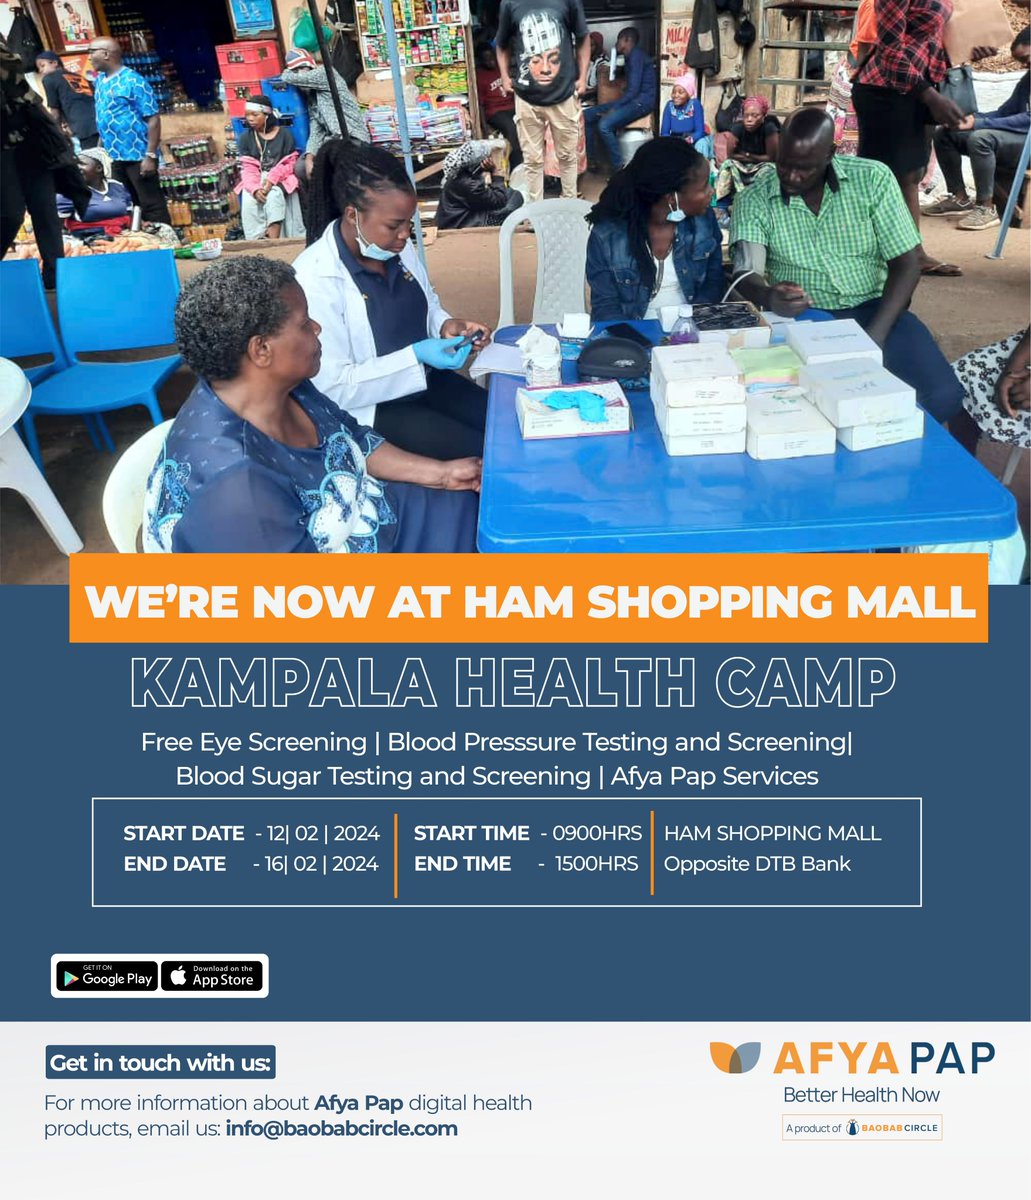 Join us this week at Ham Shopping Mall. Gain valuable knowledge and explore how Afya Pap can help you achieve better health outocmes. Come through for free eye, blood pressure and blood sugar screening. 

#AfyaPap #remotepatientmonitoring